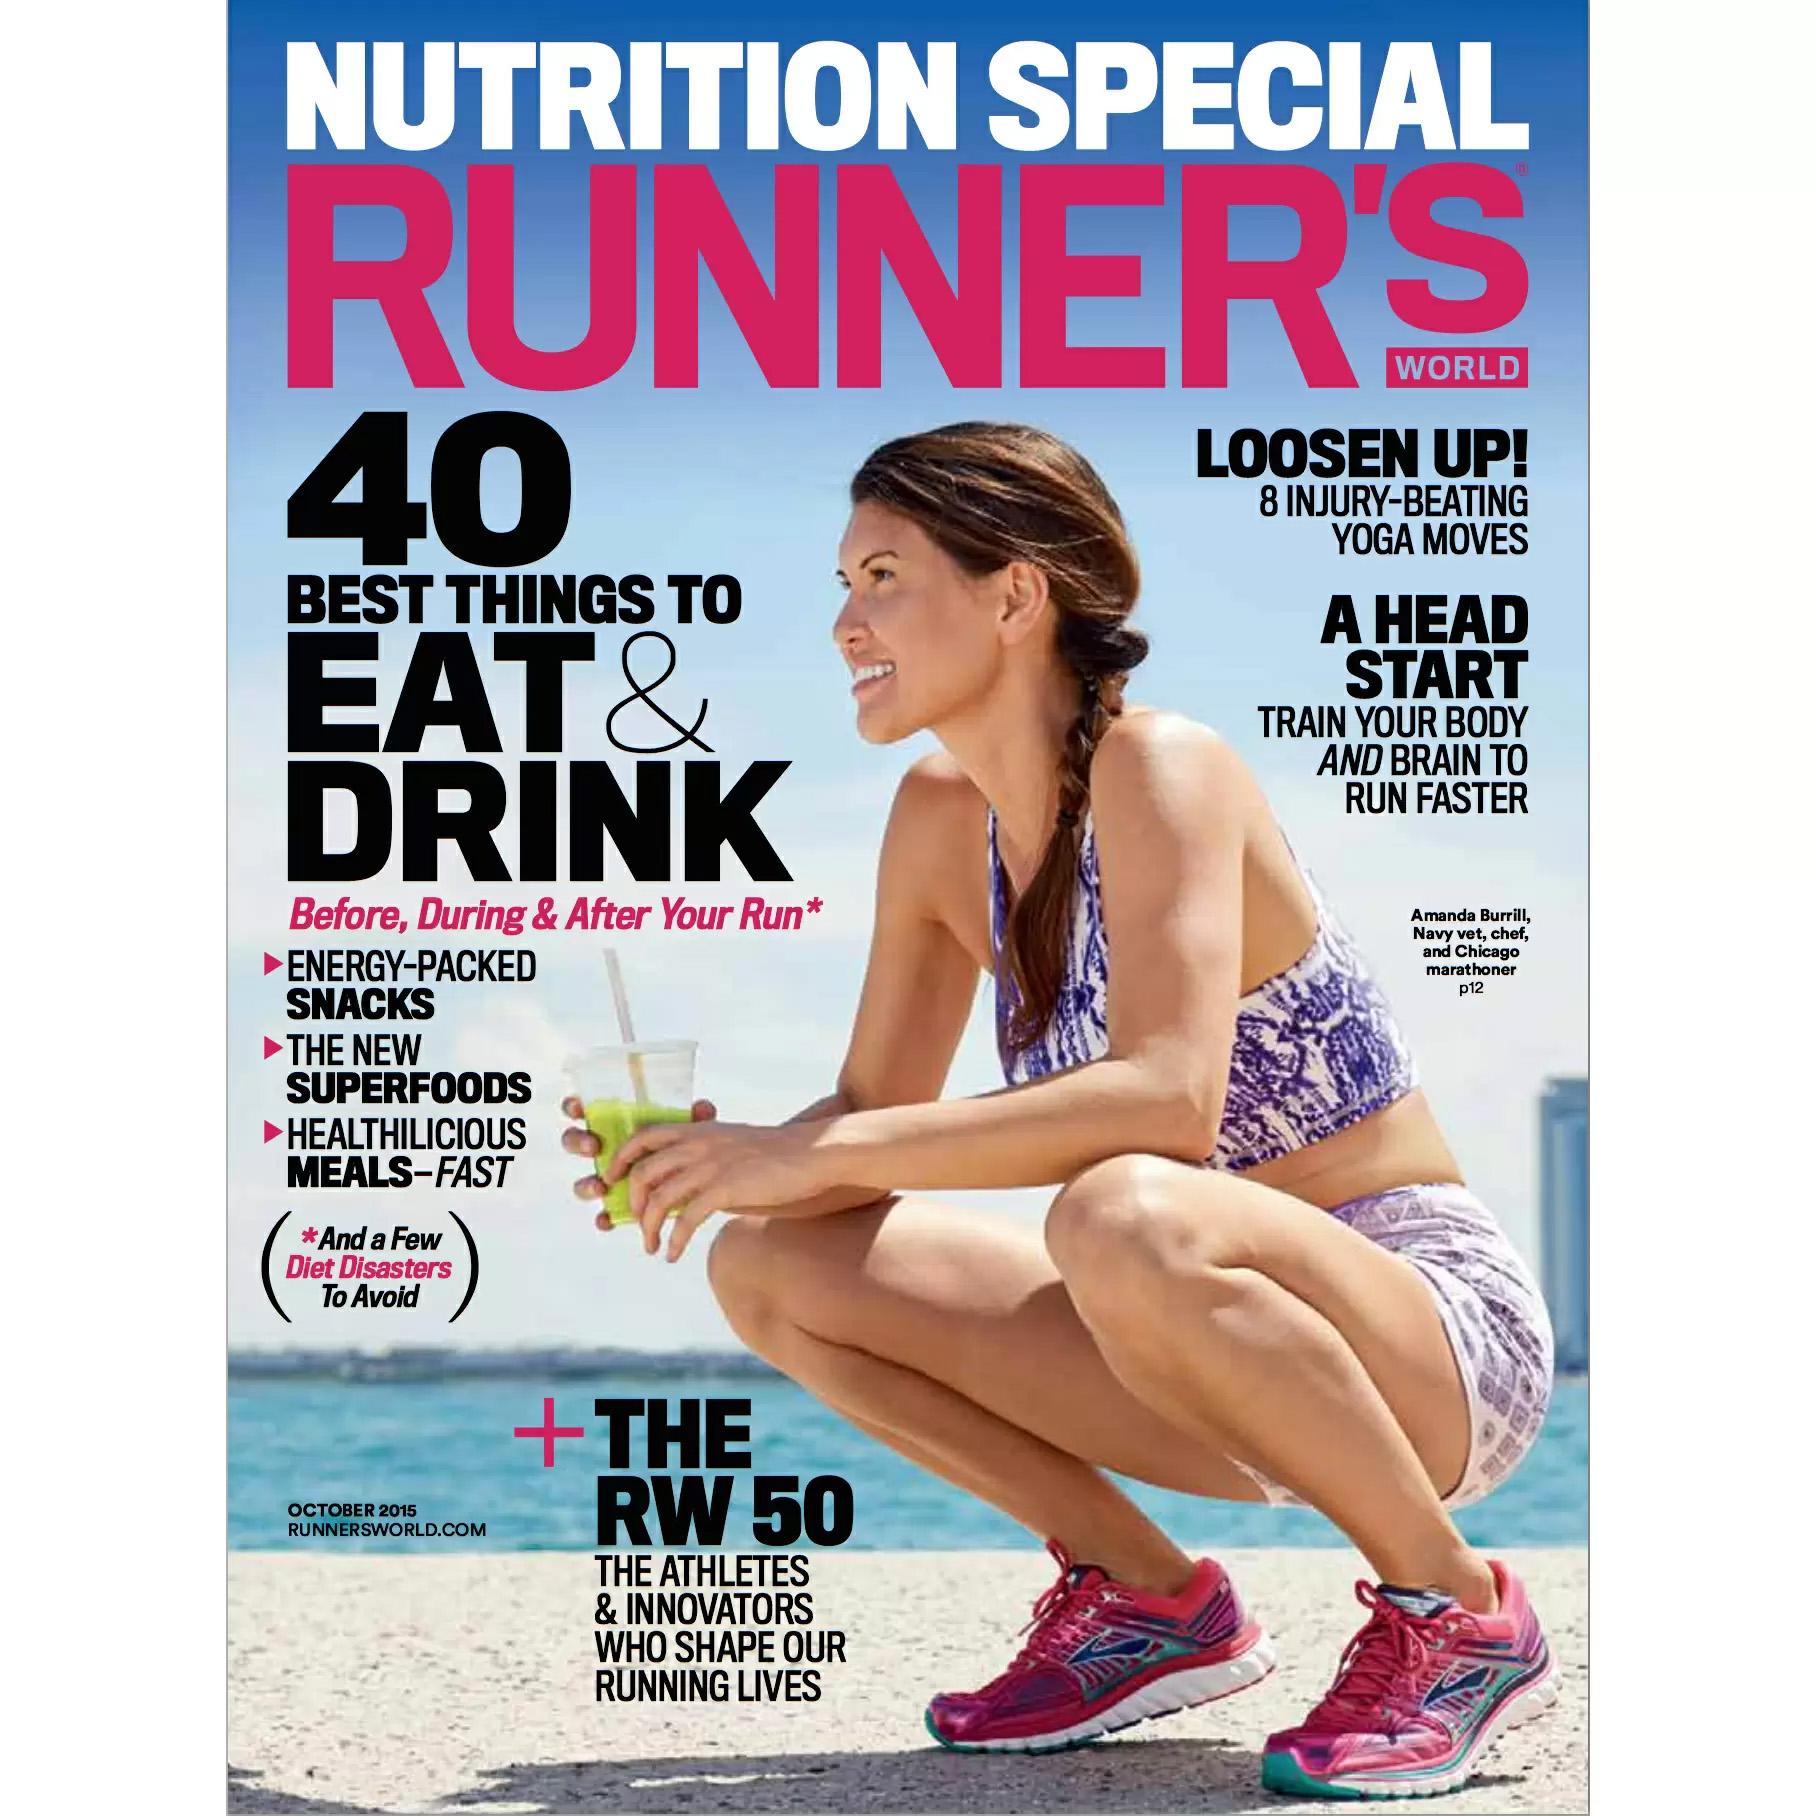 Runners World Magazine Year Subscription for $5